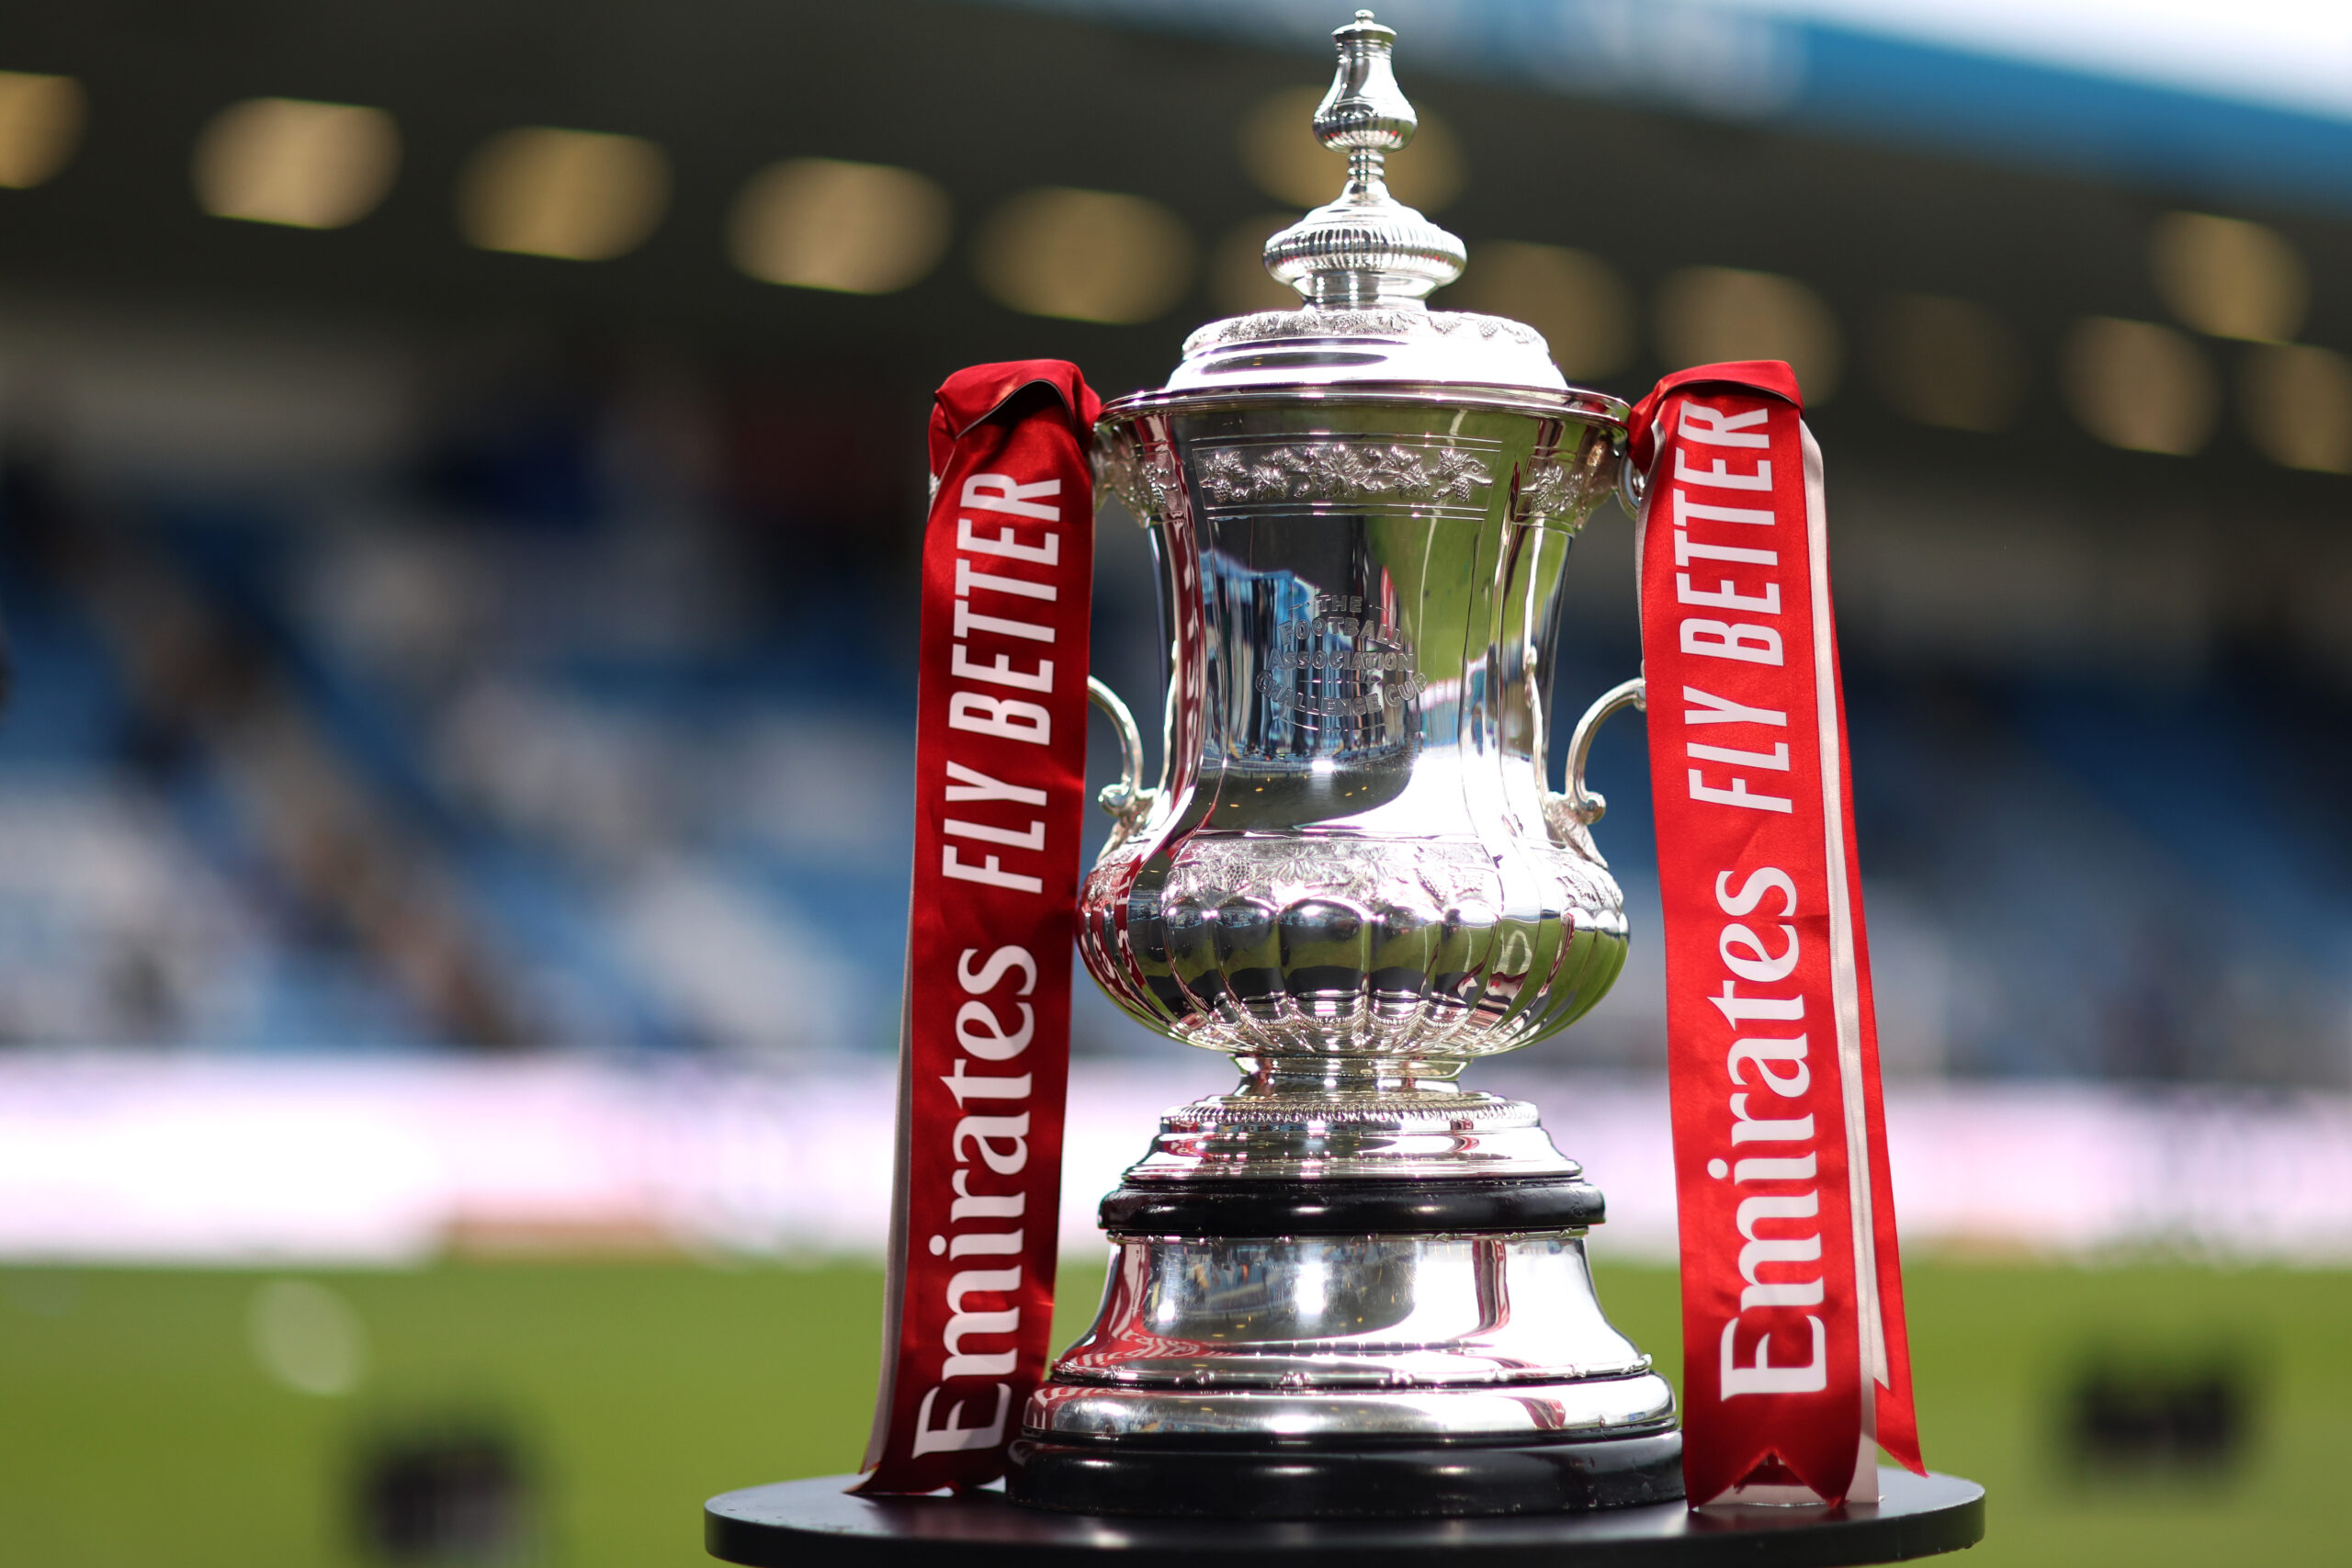 The FA Cup, a coveted trophy in England